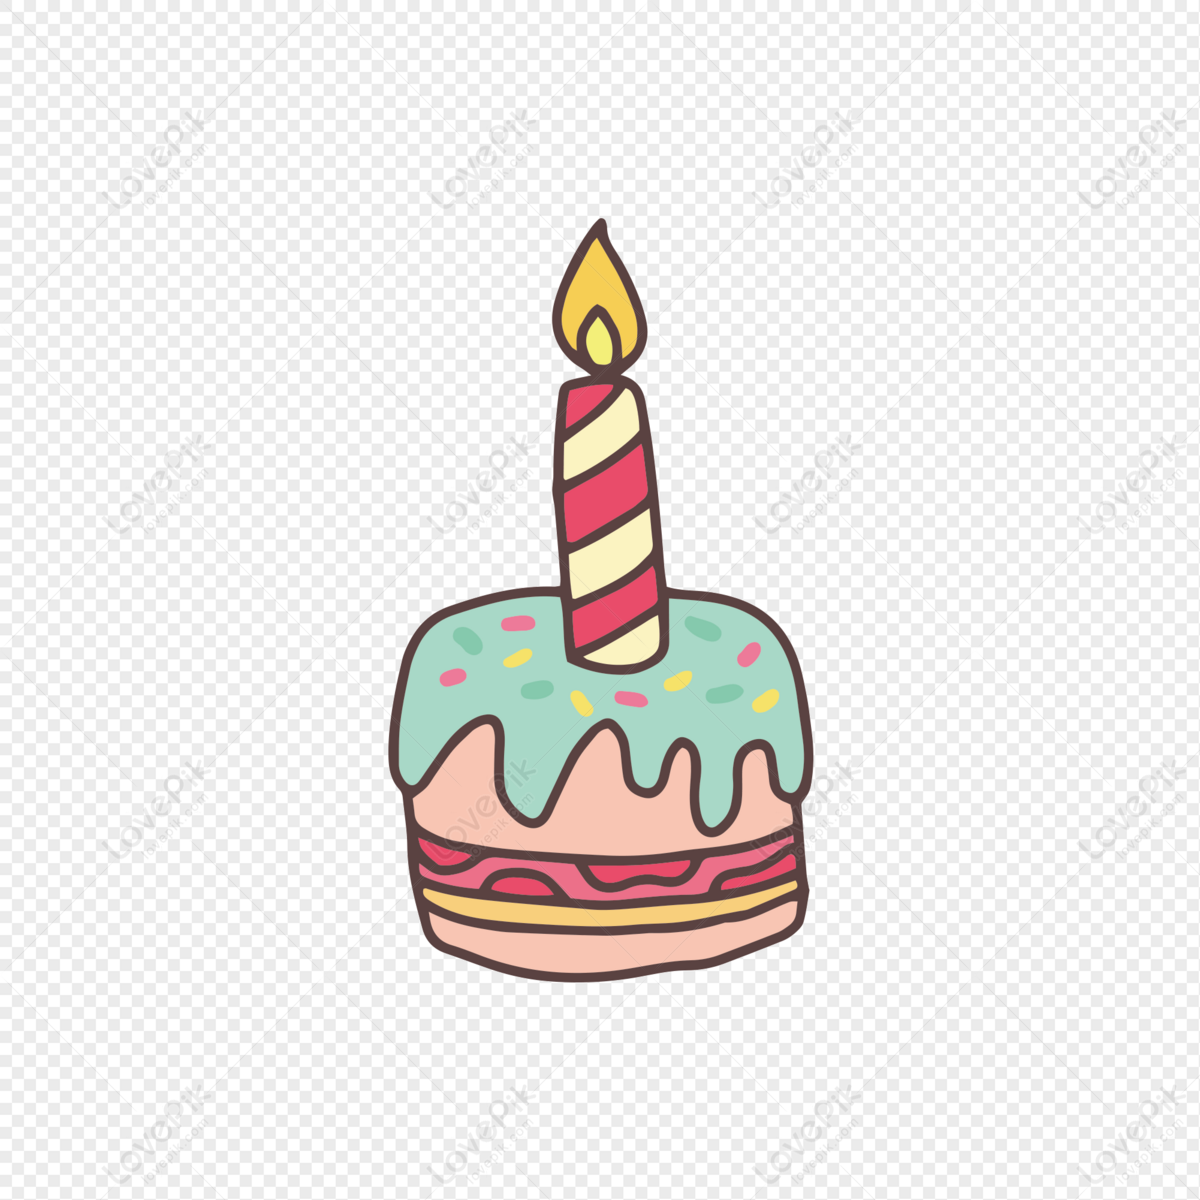 Buy Cake Clipart, Birthday Cake PNG, Digital Download Online in India - Etsy